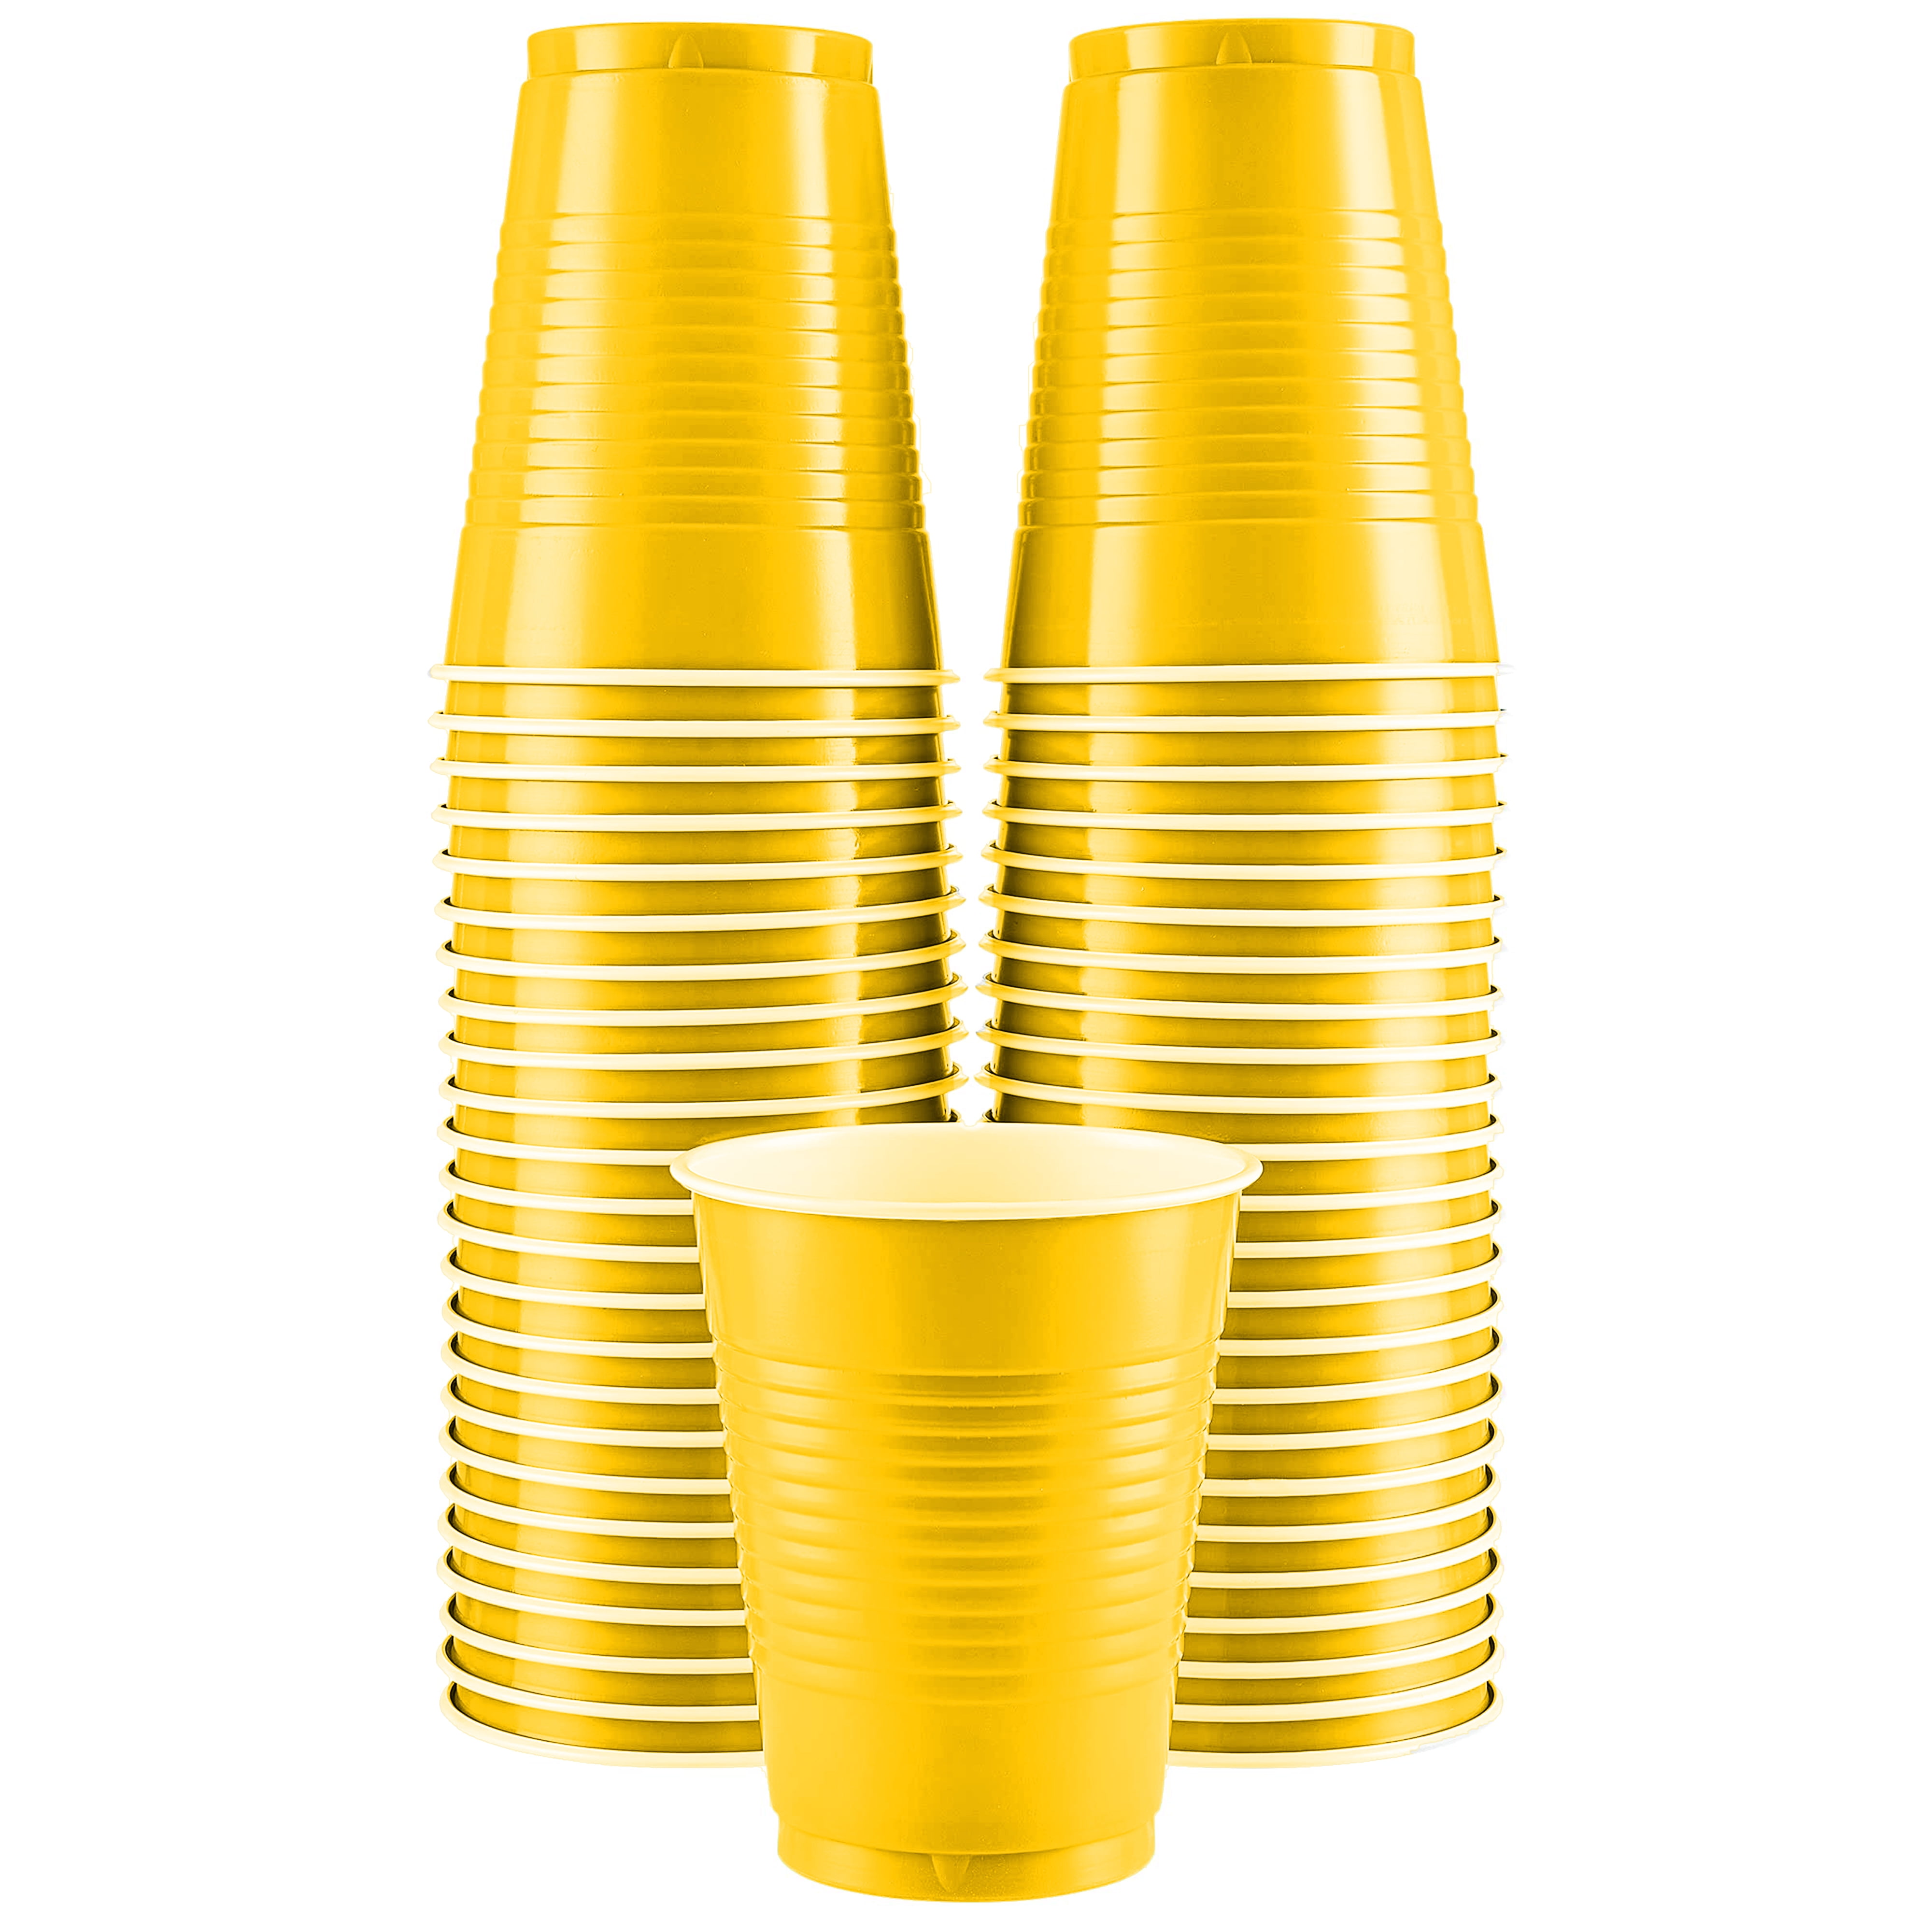 Exquisite 12 Ounce Disposable Yellow Plastic Cups-50 Count